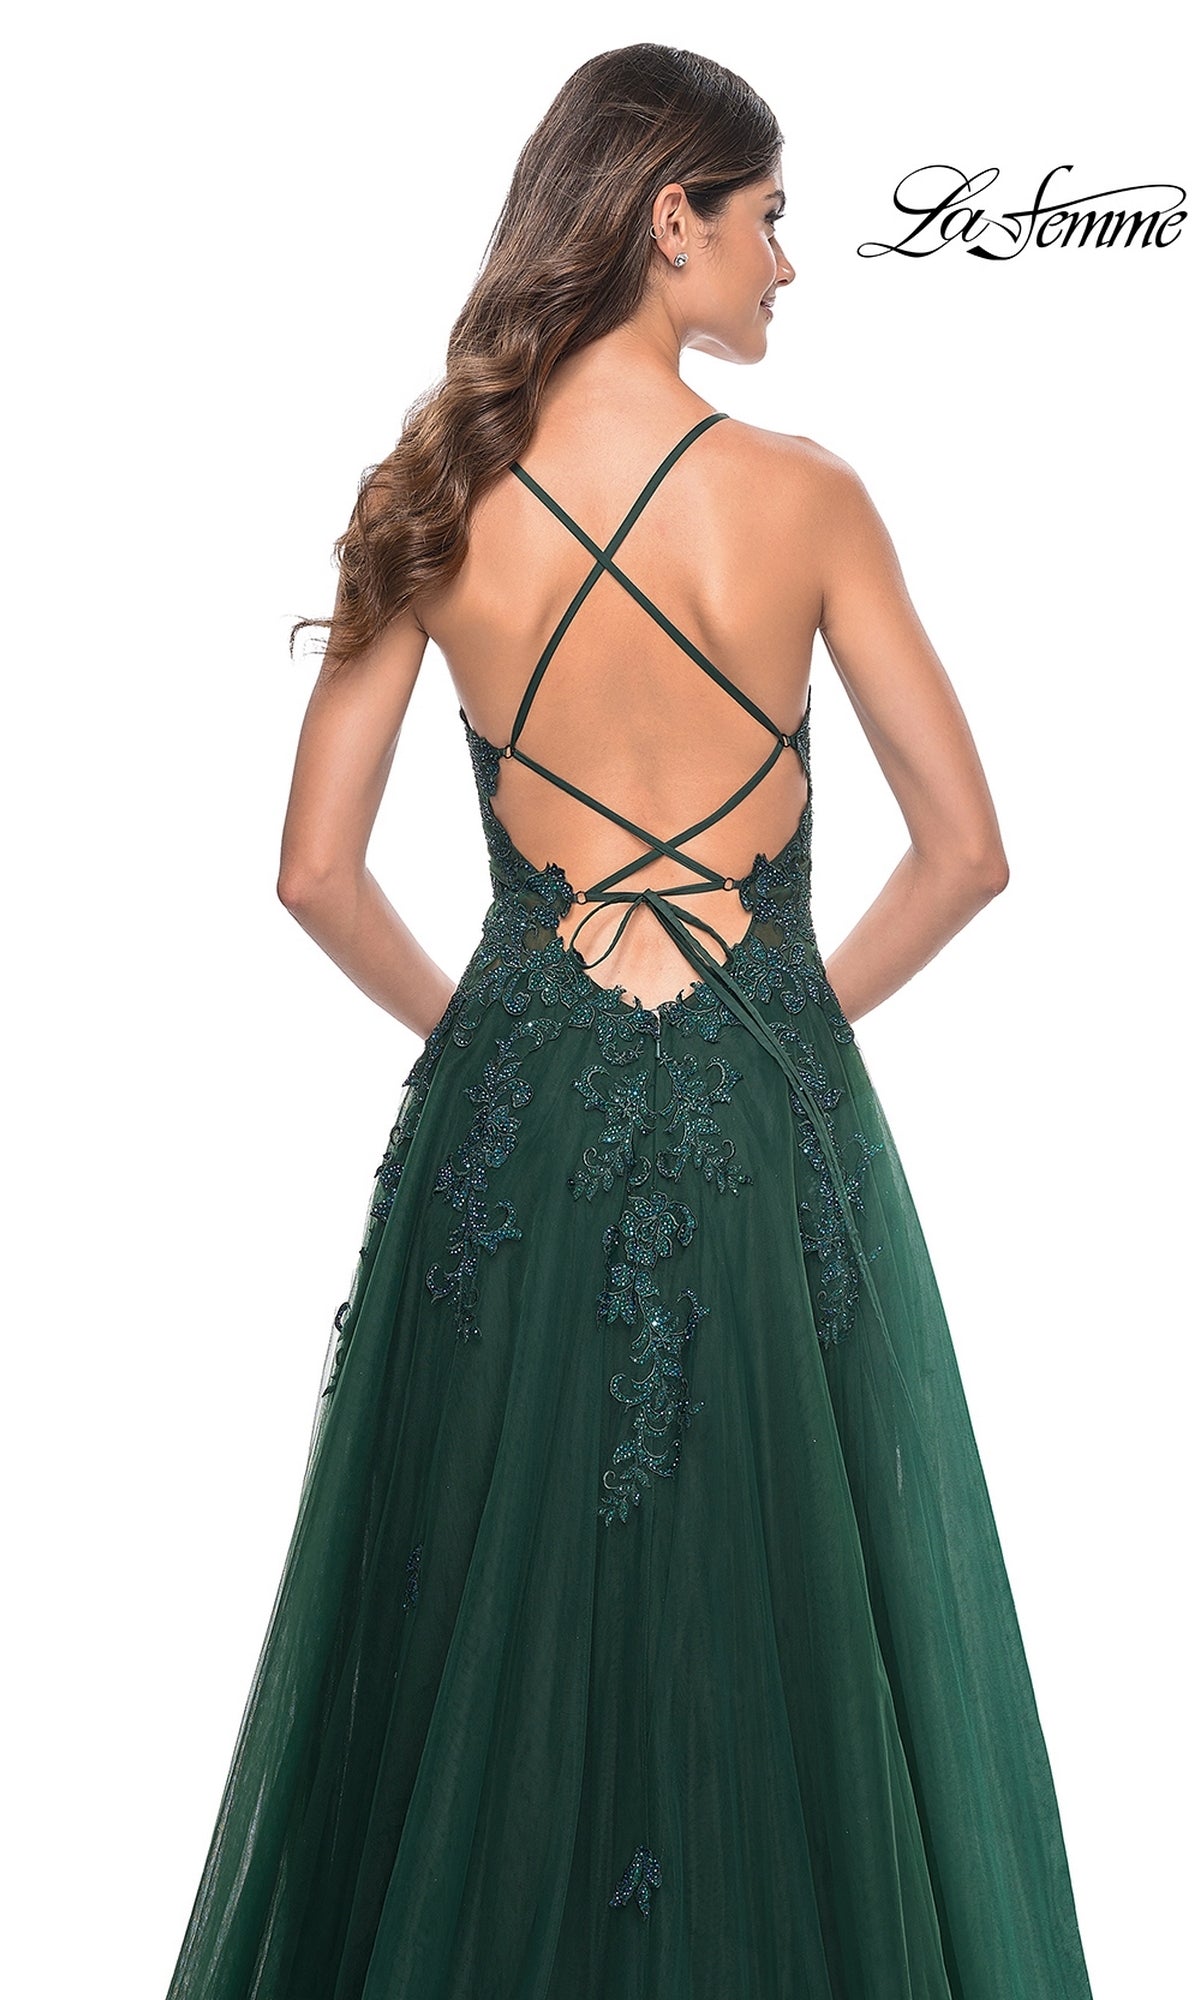 La Femme Embroidered-Lace Long Prom Gown 32022